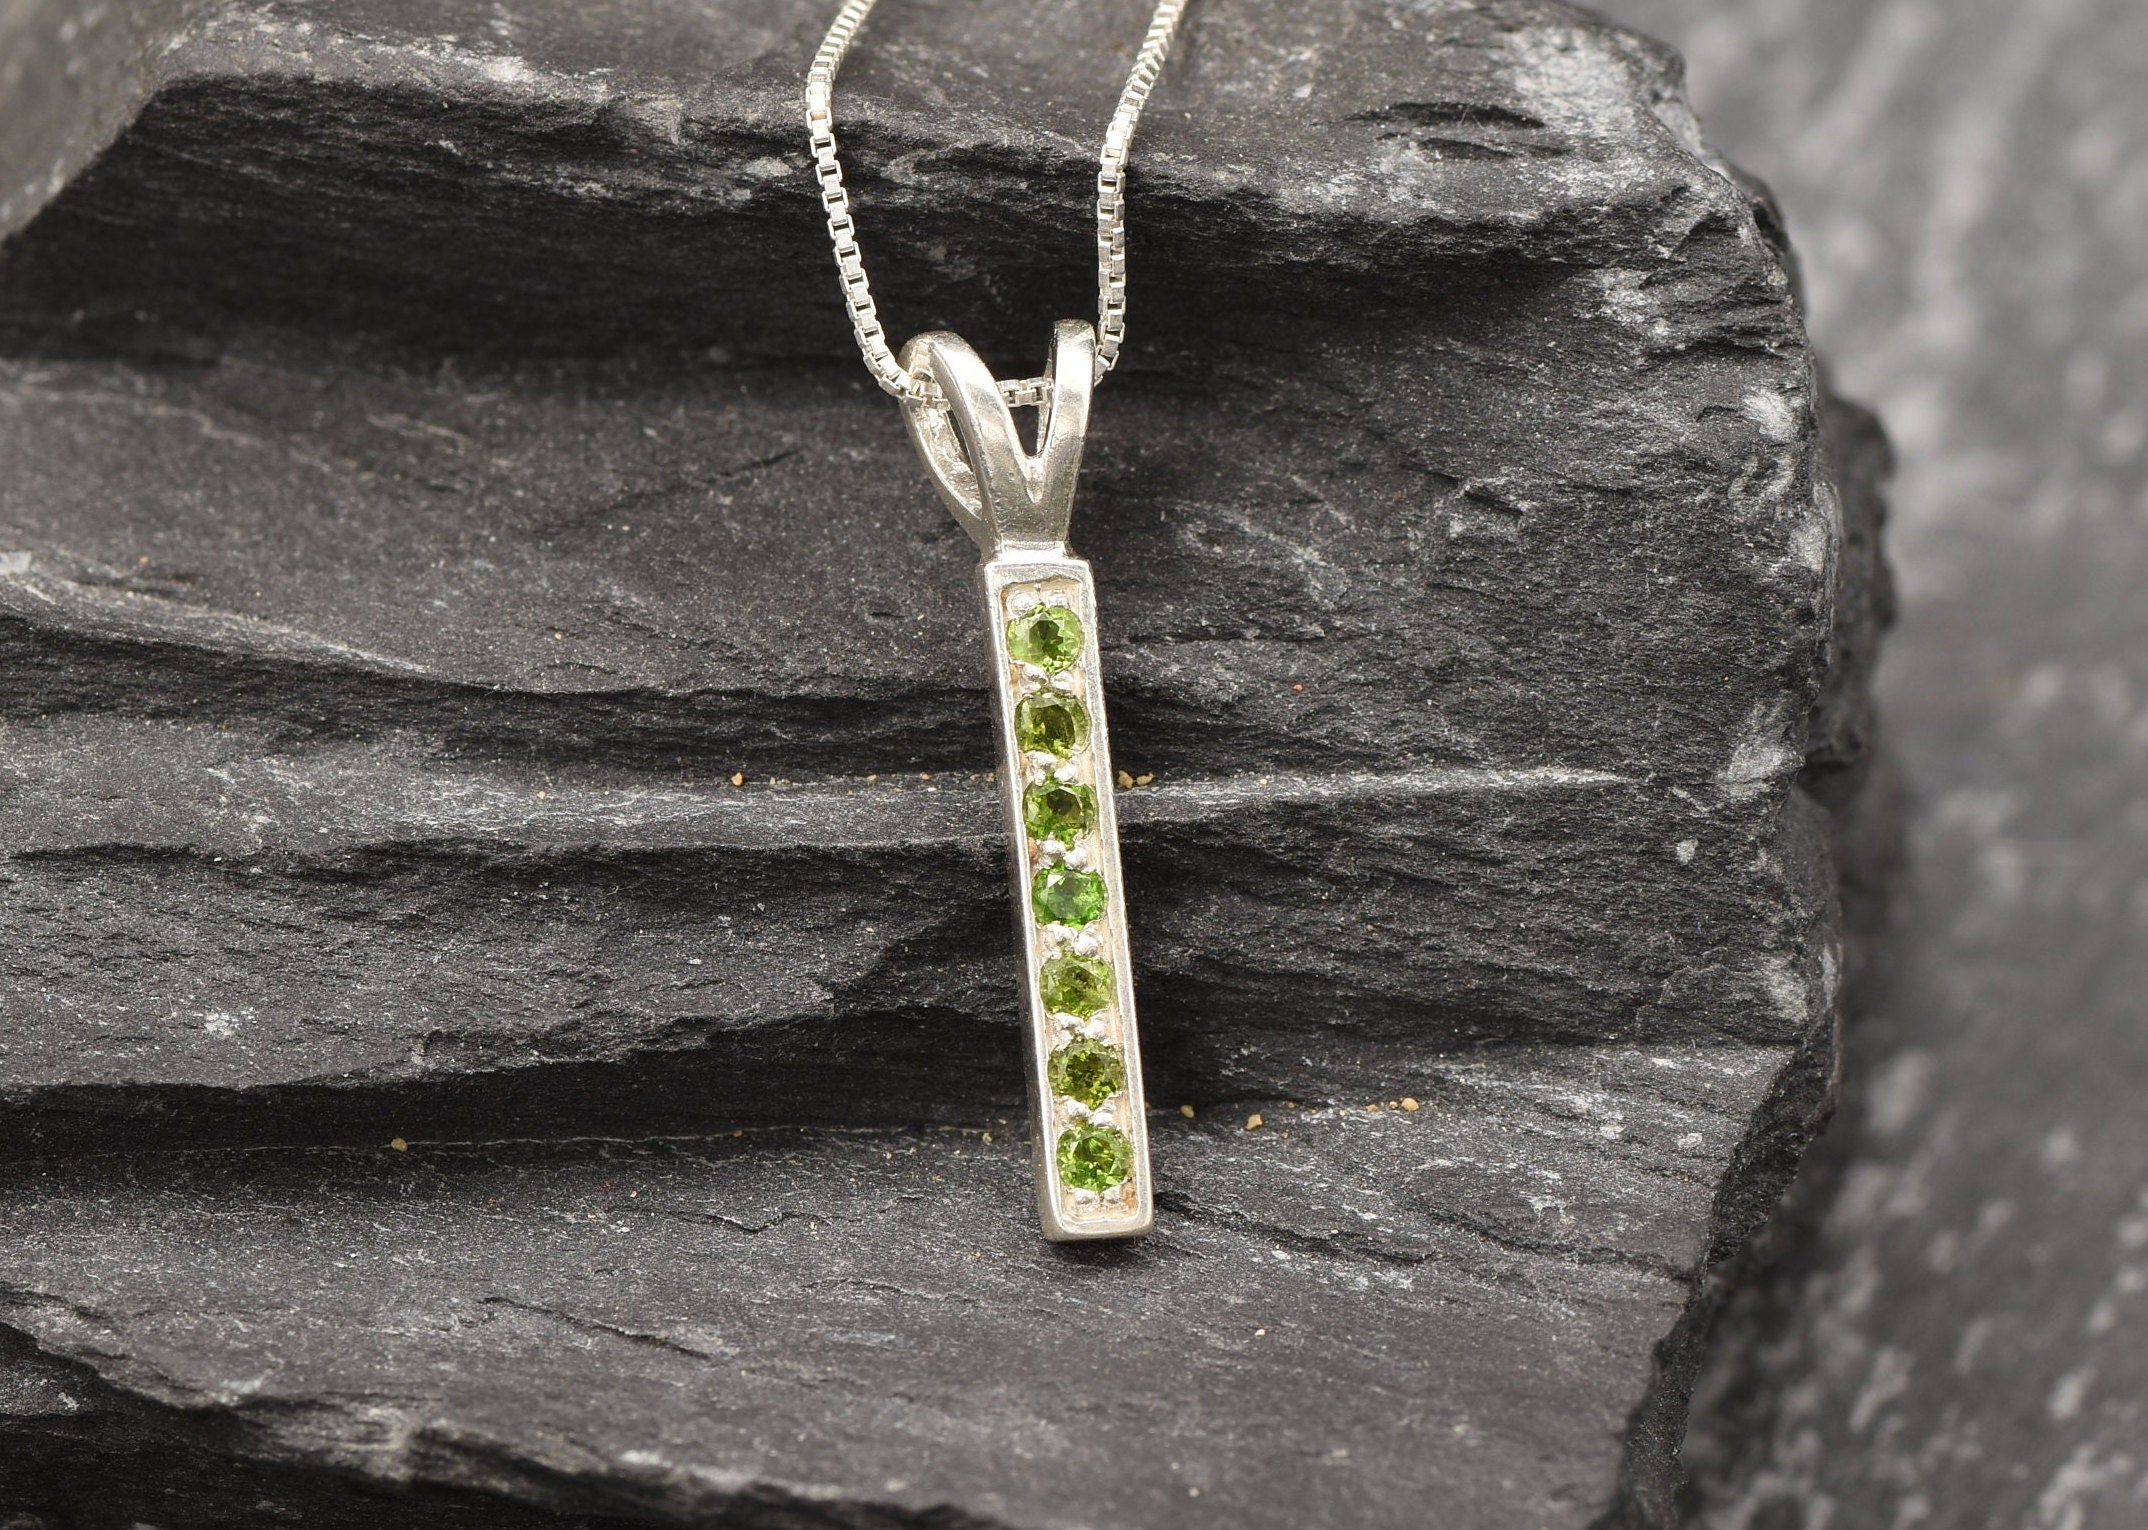 Green Bar Pendant, Chrome Diopside Necklace, Emerald Green Pendant, Layering Necklace, Line Pendant, Natural Diopside, Solid Silver Pendant